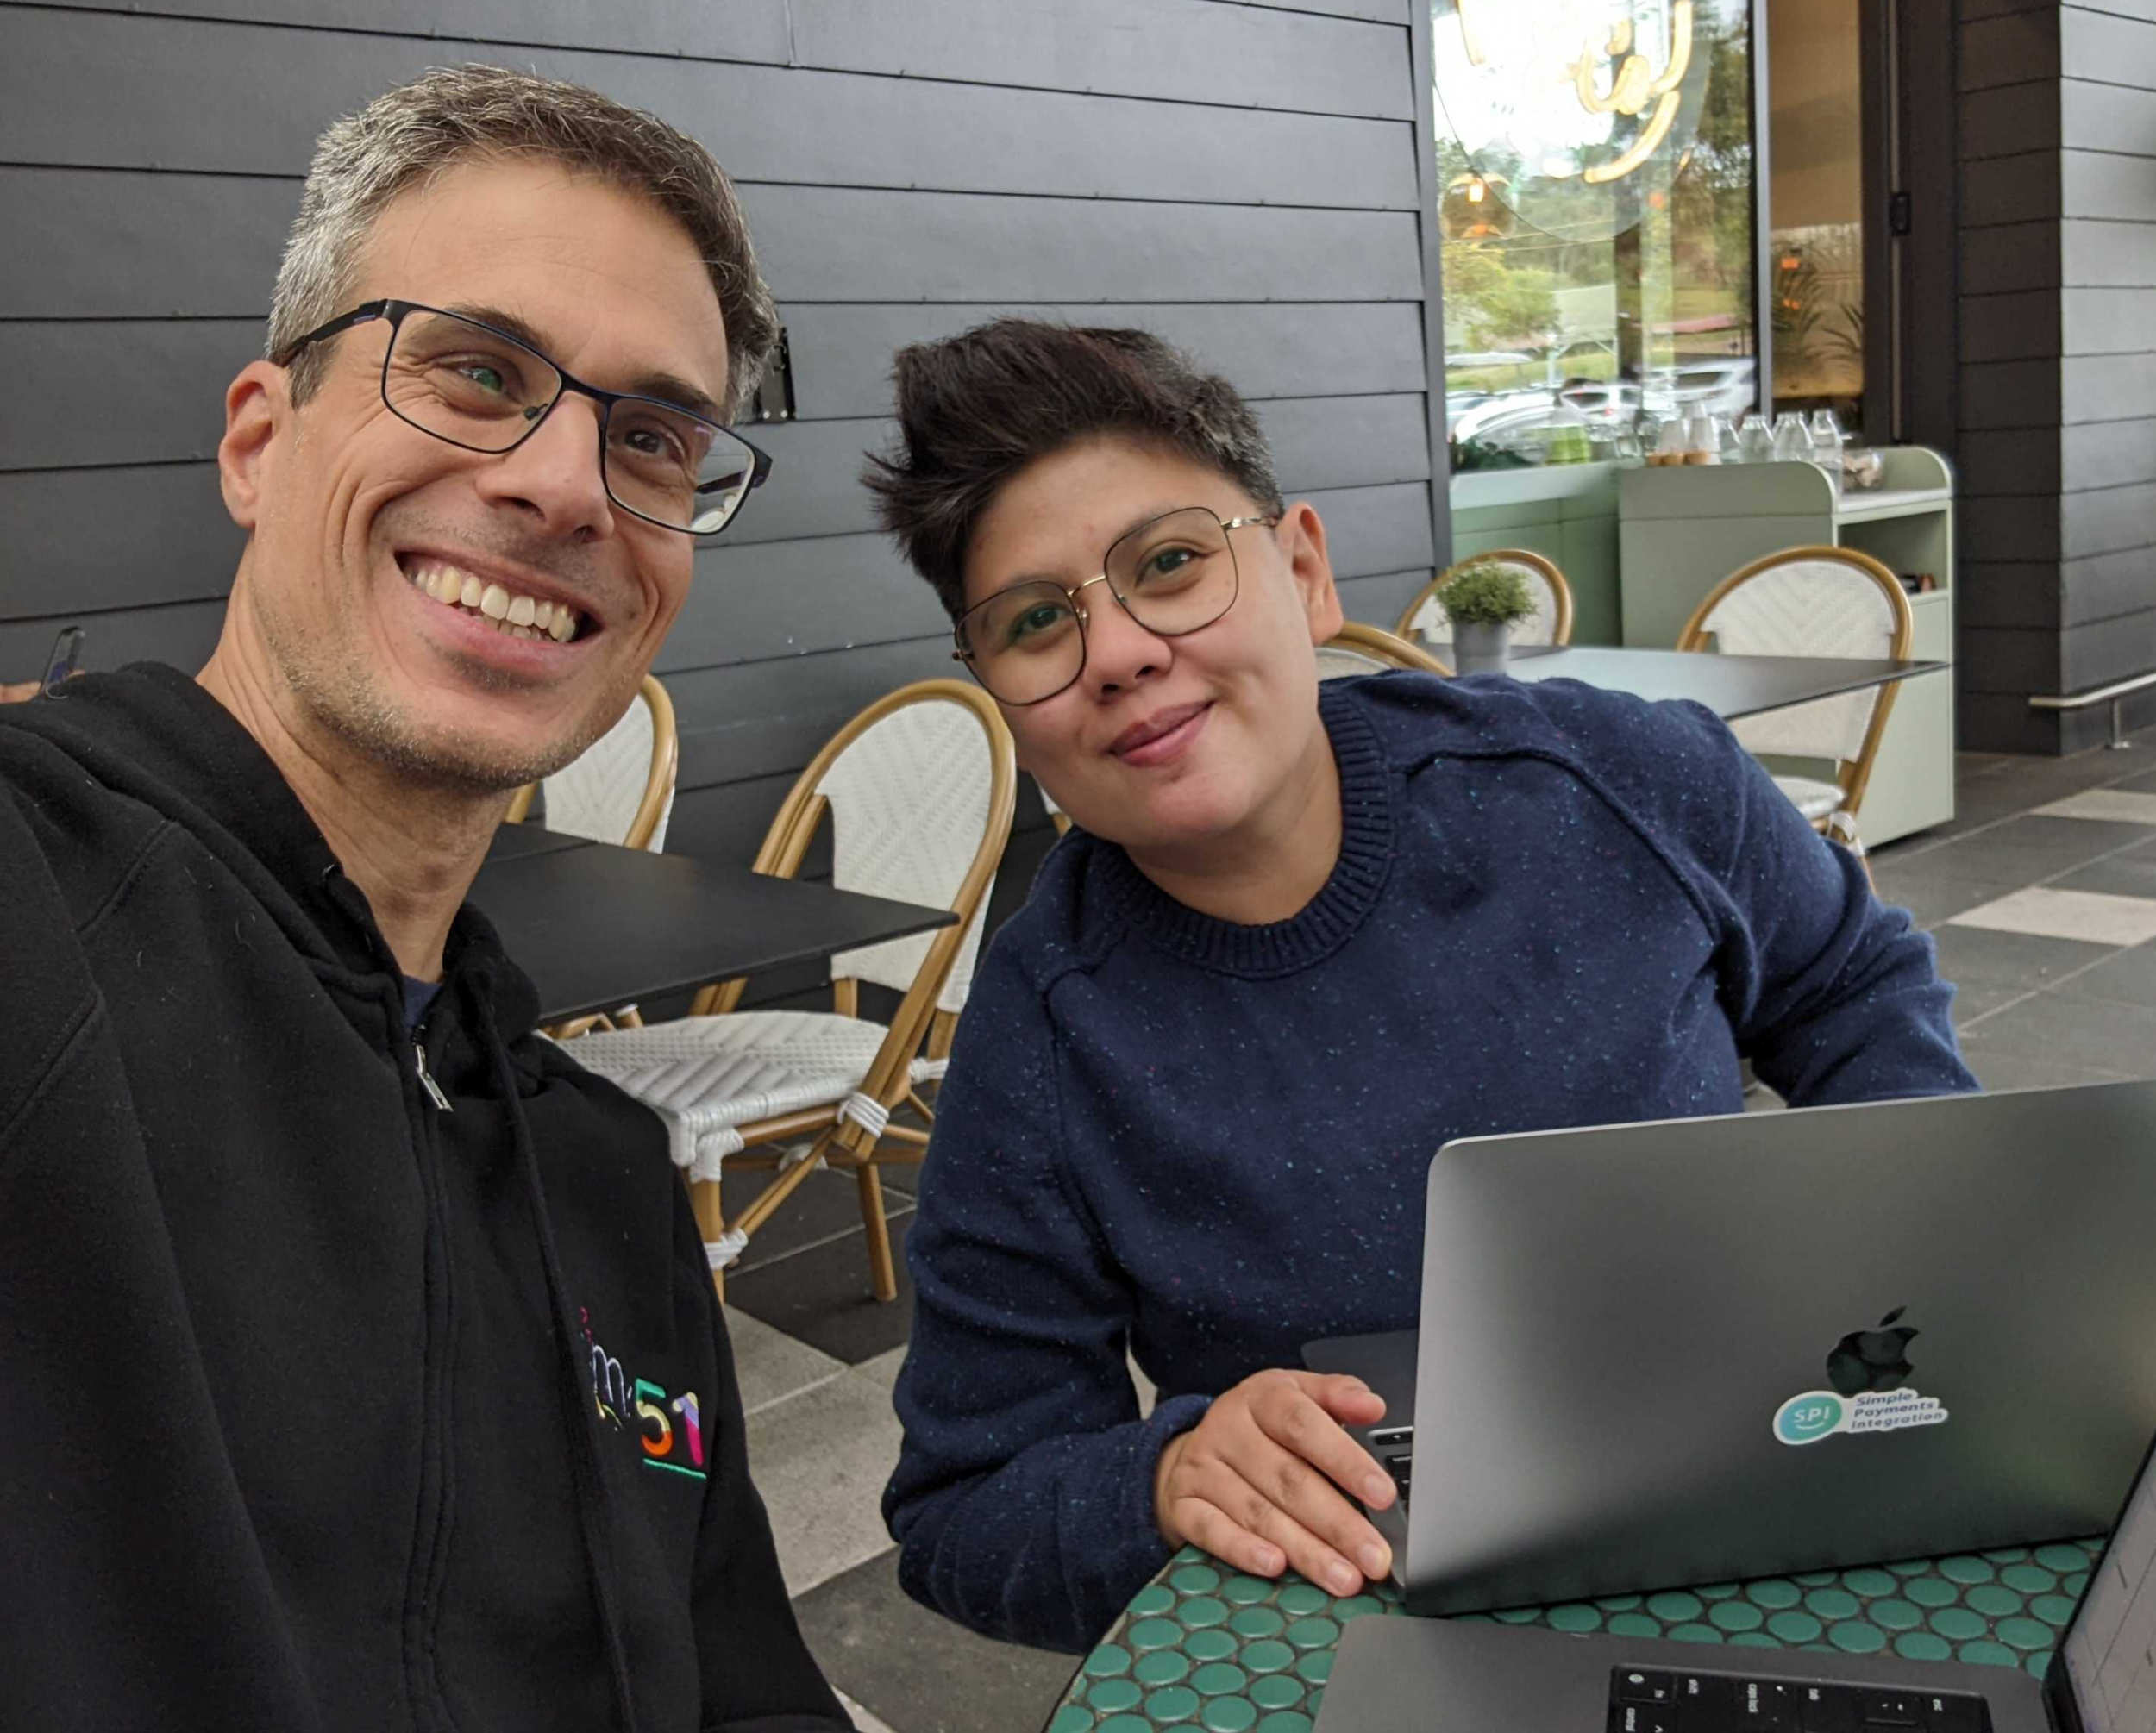 A selfie of two mx51 employees smiling for the camera, sitting at a cafe with their laptops.